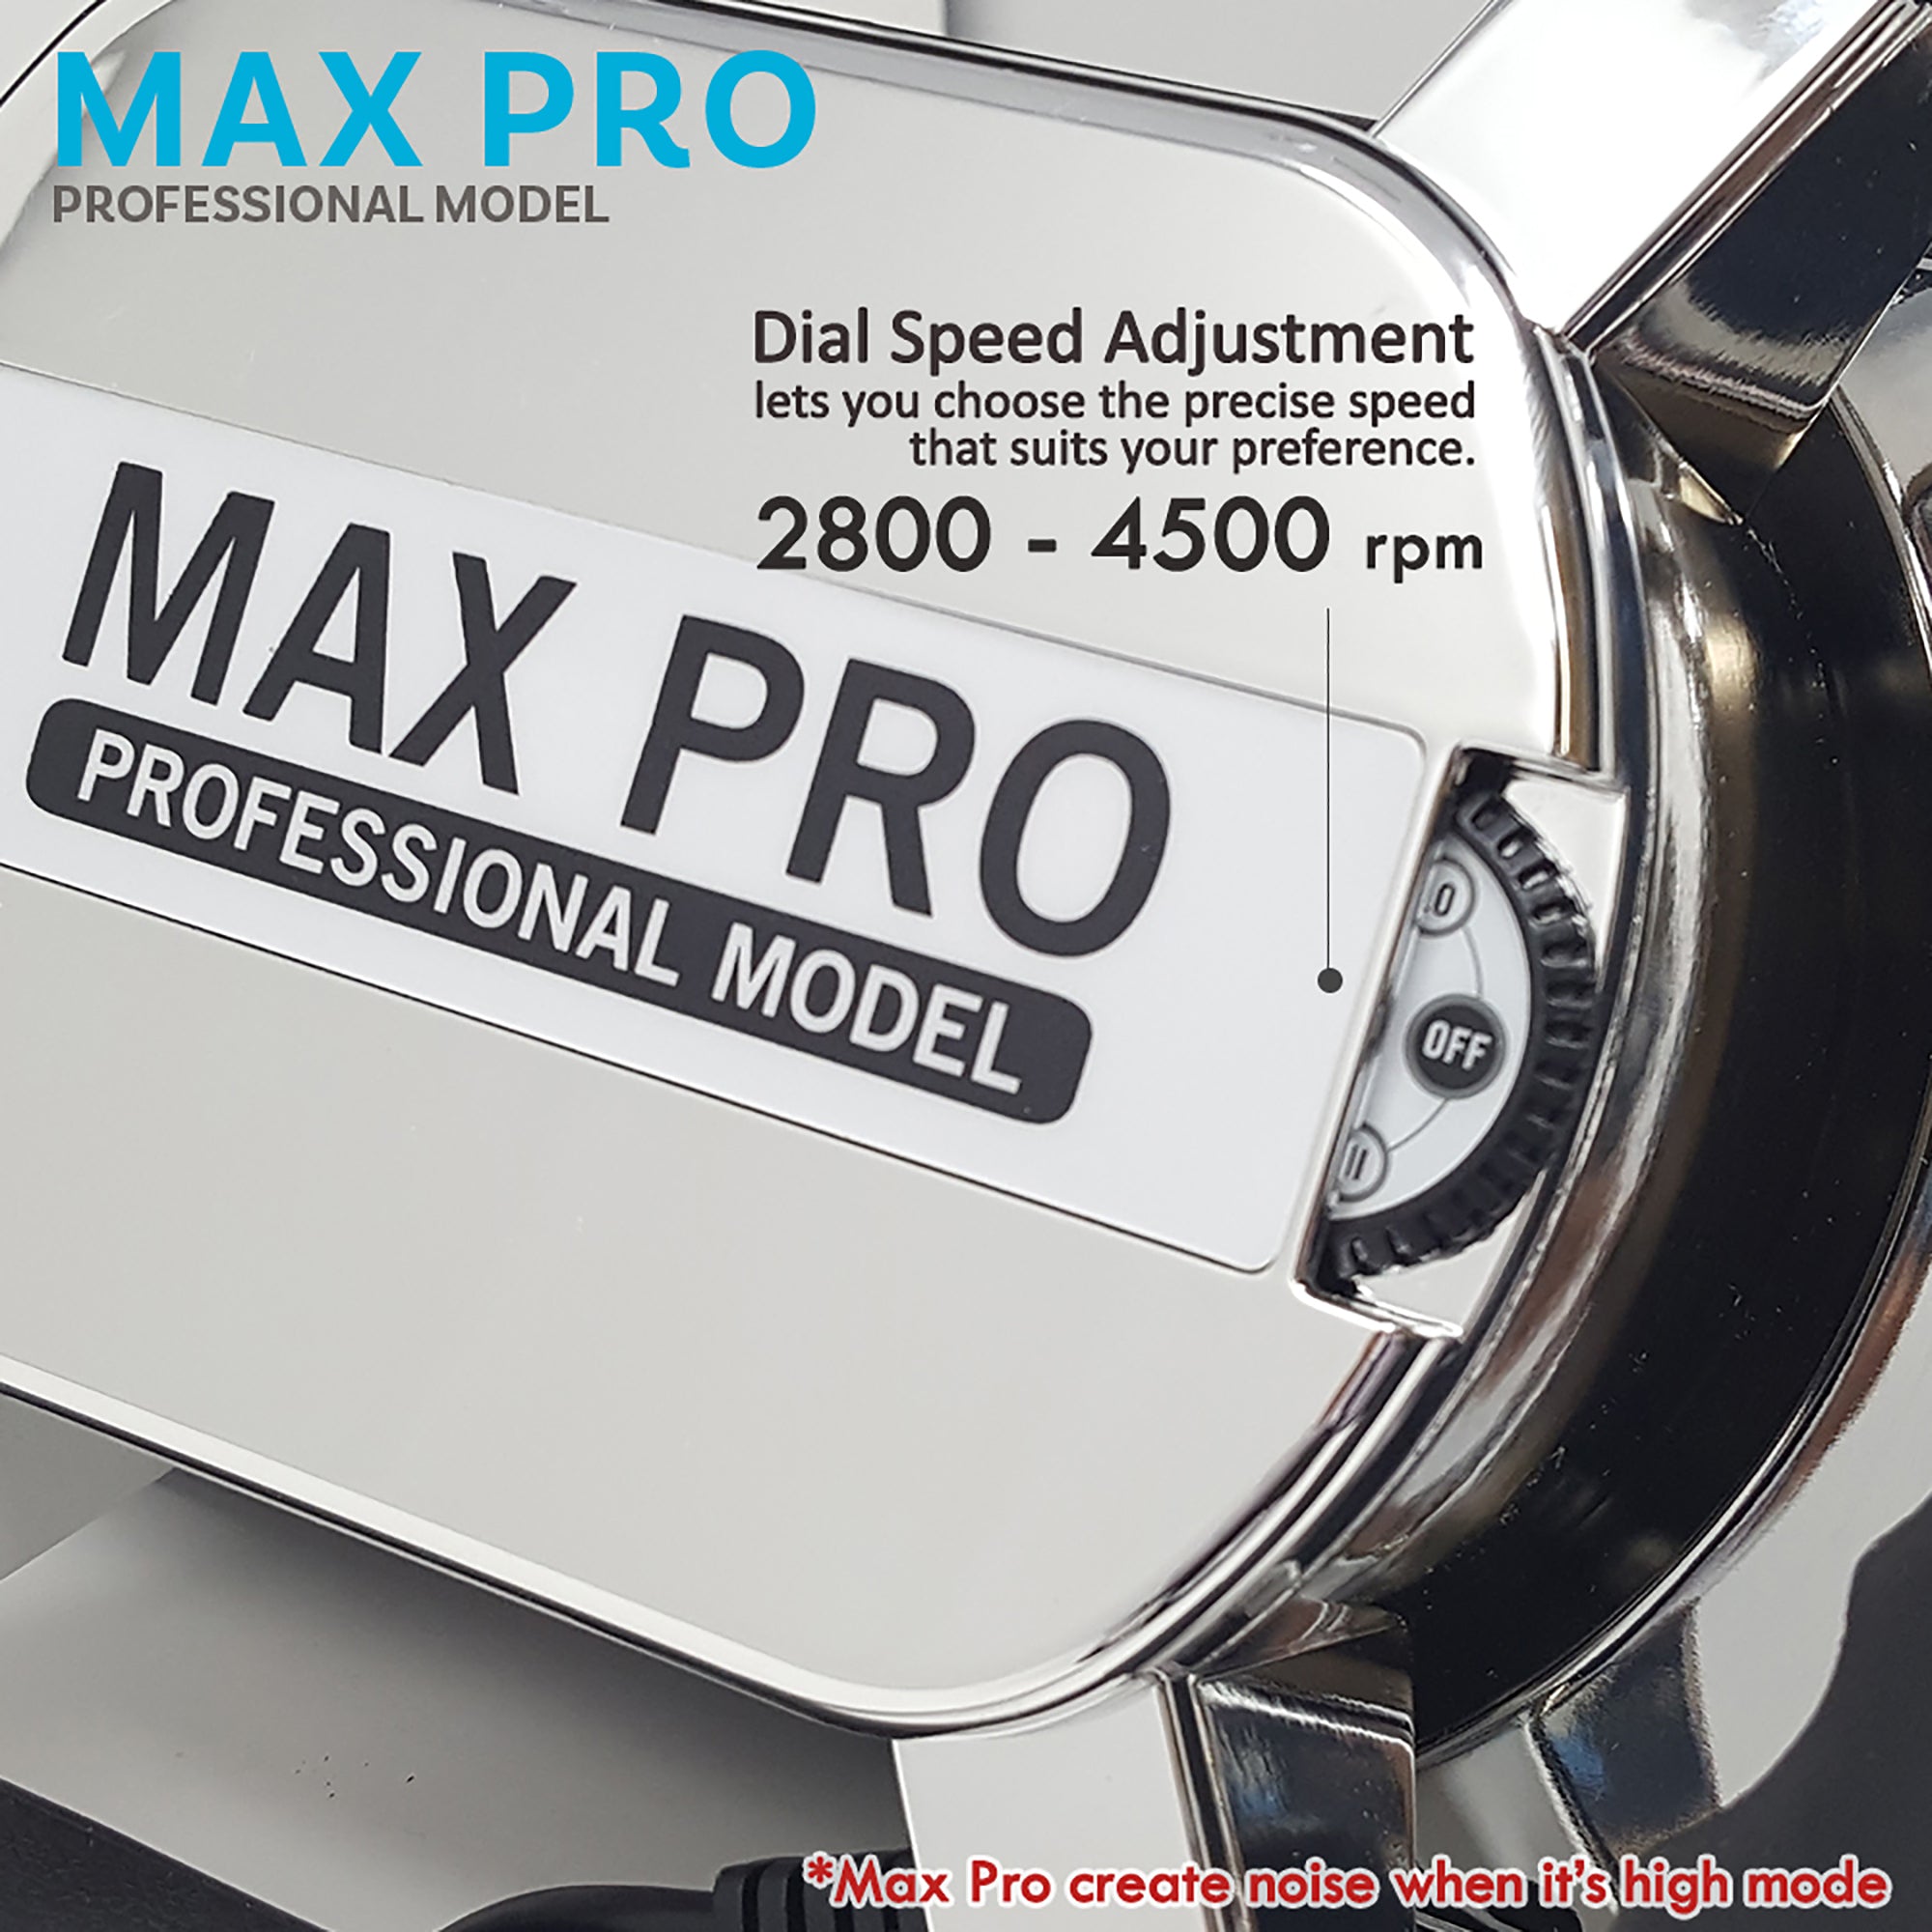 Max Pro Chiropractic Massager Professional Heavy Duty Rub Variable Speed Massager